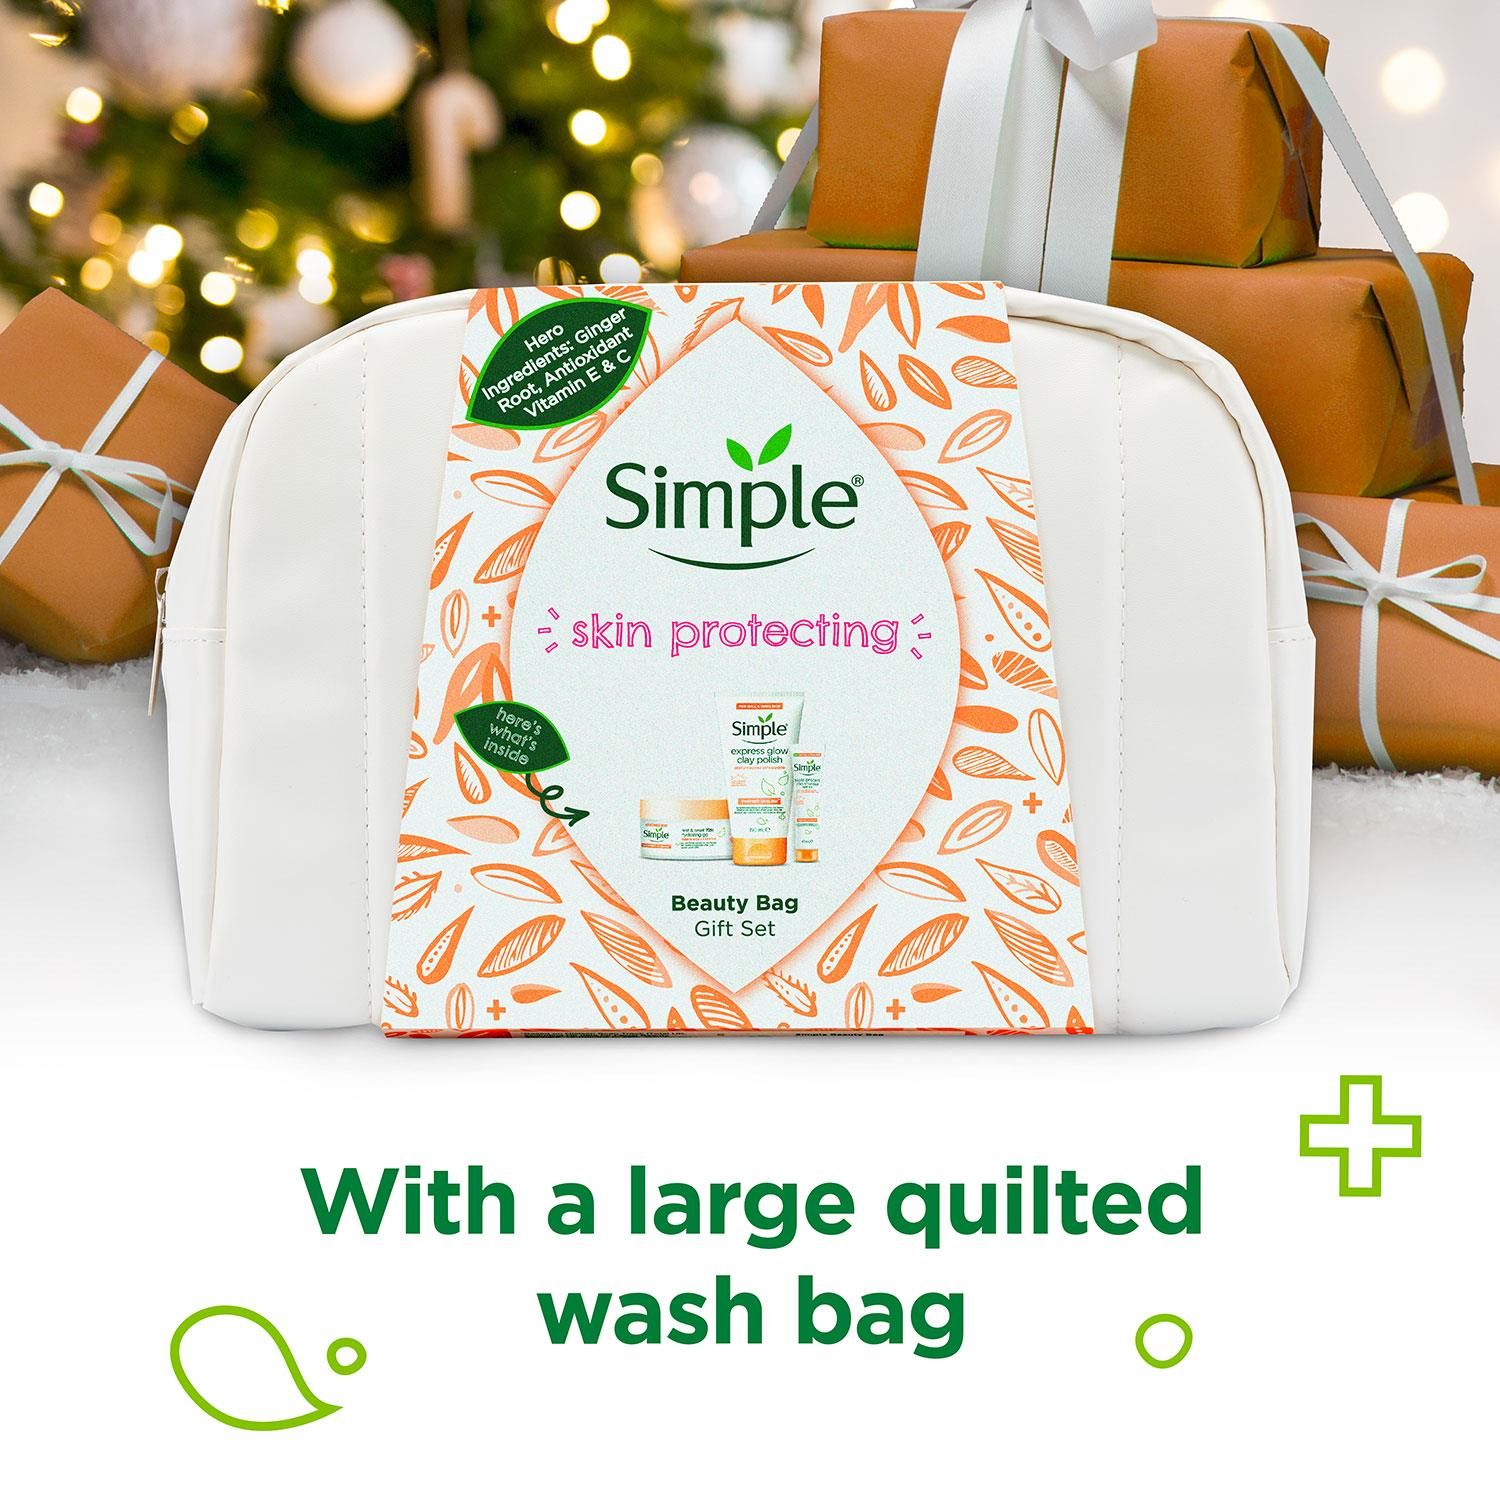 Know someone who is totally and utterly into taking care of their skin in the kindest way possible  The Simple Skin Protecting Beauty Bag Gift Set will make their entire day. Right from the get-go, the Simple philosophy has always been about being kind to skin, even the most sensitive. Because all skin can be sensitive at times. That's why this set of Christmas gifts comes with an abundance of Simple products that are kind to their skin. 

Featuring Protect 'N' Glow Rest and Reset 72h Hydrating Gel. Yasss! Supercharged with ingredients that help brighten dull complexions, this overnight gel is your shortcut to get the glow you've always dreamed of. Simple Protect 'N' Glow Triple Protect Moisturiser SPF 30 is your all-in-one secret weapon - think sun-protected, naturally glowing skin, without that greasy feeling. 

Features:
With brightening antioxidants, vitamins C & E, and organic Ginger Root Extract, this gel-textured night cream boosts your skin's natural renewal process, for glowing skin by morning
Our vegan Rest and Reset 72h Hydrating Gel is free from artificial colour, perfume and mineral oil and contains no harsh chemicals
Simple Protect 'N' Glow Triple Protect Moisturiser SPF 30 is super lightweight and doesn't leave residue on the skin. Amazing!
With brightening anti-oxidants such as vitamins C & E and organic ginger root extract as well as prebiotics, this moisturiser with SPF protects and hydrates your skin throughout the day

Safety Warnings: For external use only. Avoid getting into your eyes. For external use only. Avoid getting into your eyes. 

Each Gift Set Includes:
1x Simple Rest and Reset 72h Hydrating Gel, 50 ml
1x Simple Triple Protect Moisturiser SPF 30, 40 ml
1x Simple Express Glow Clay Polish Cleanser 150 ml